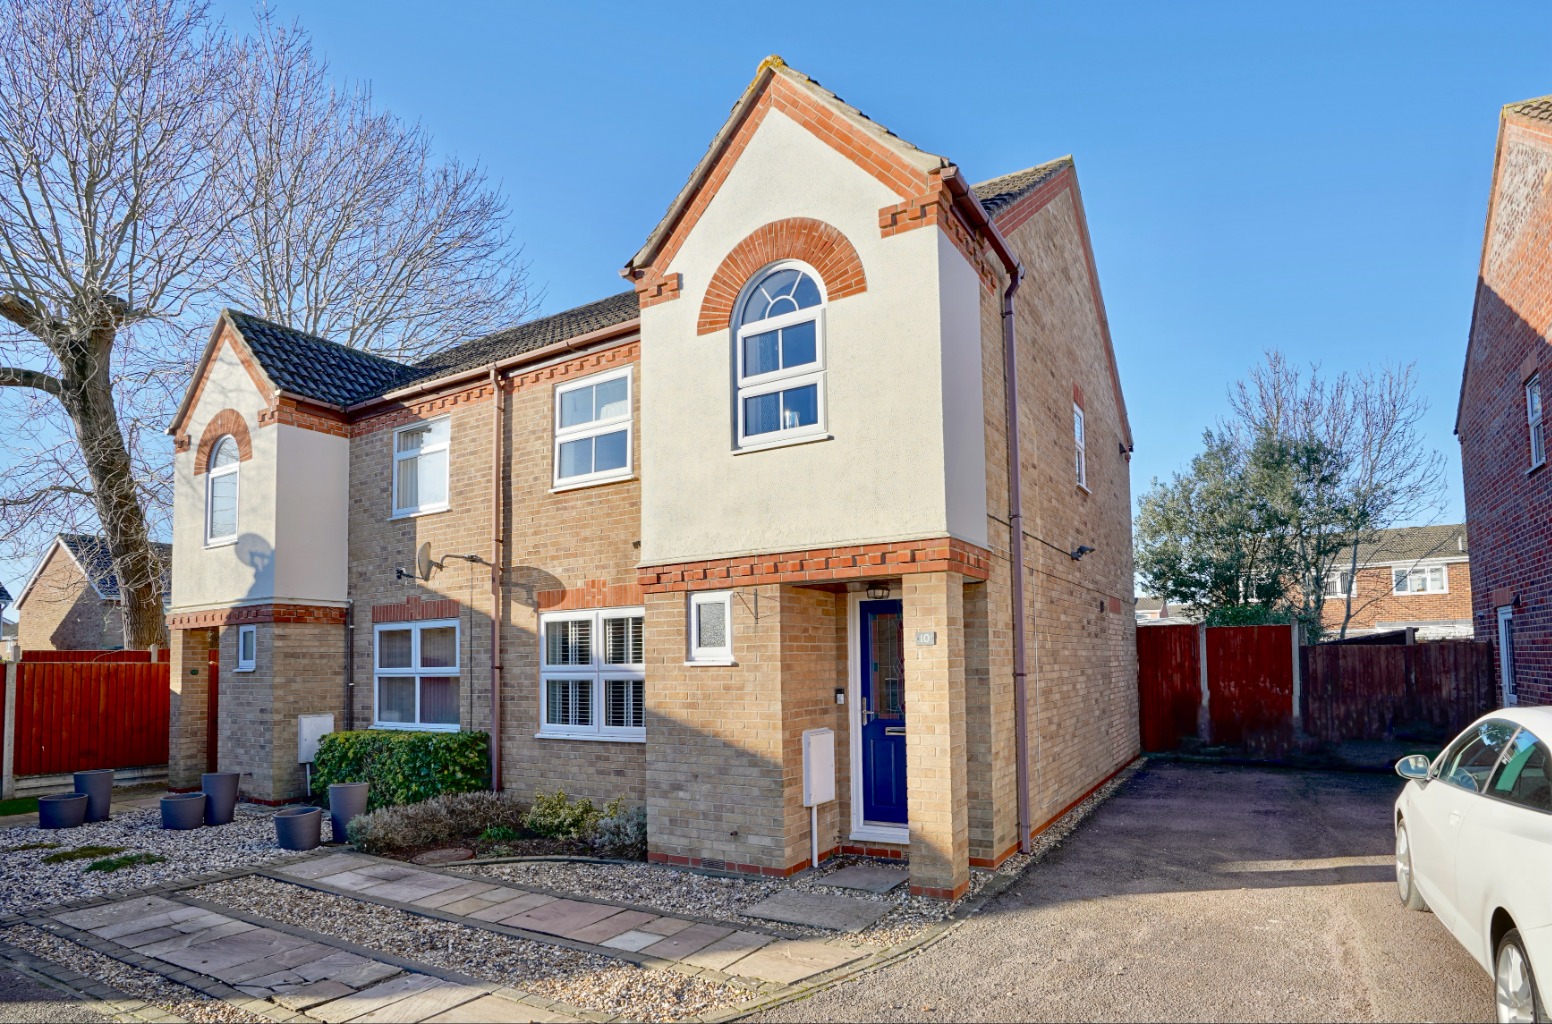 3 bed semi-detached house for sale in Capulet Close, St Neots  - Property Image 1